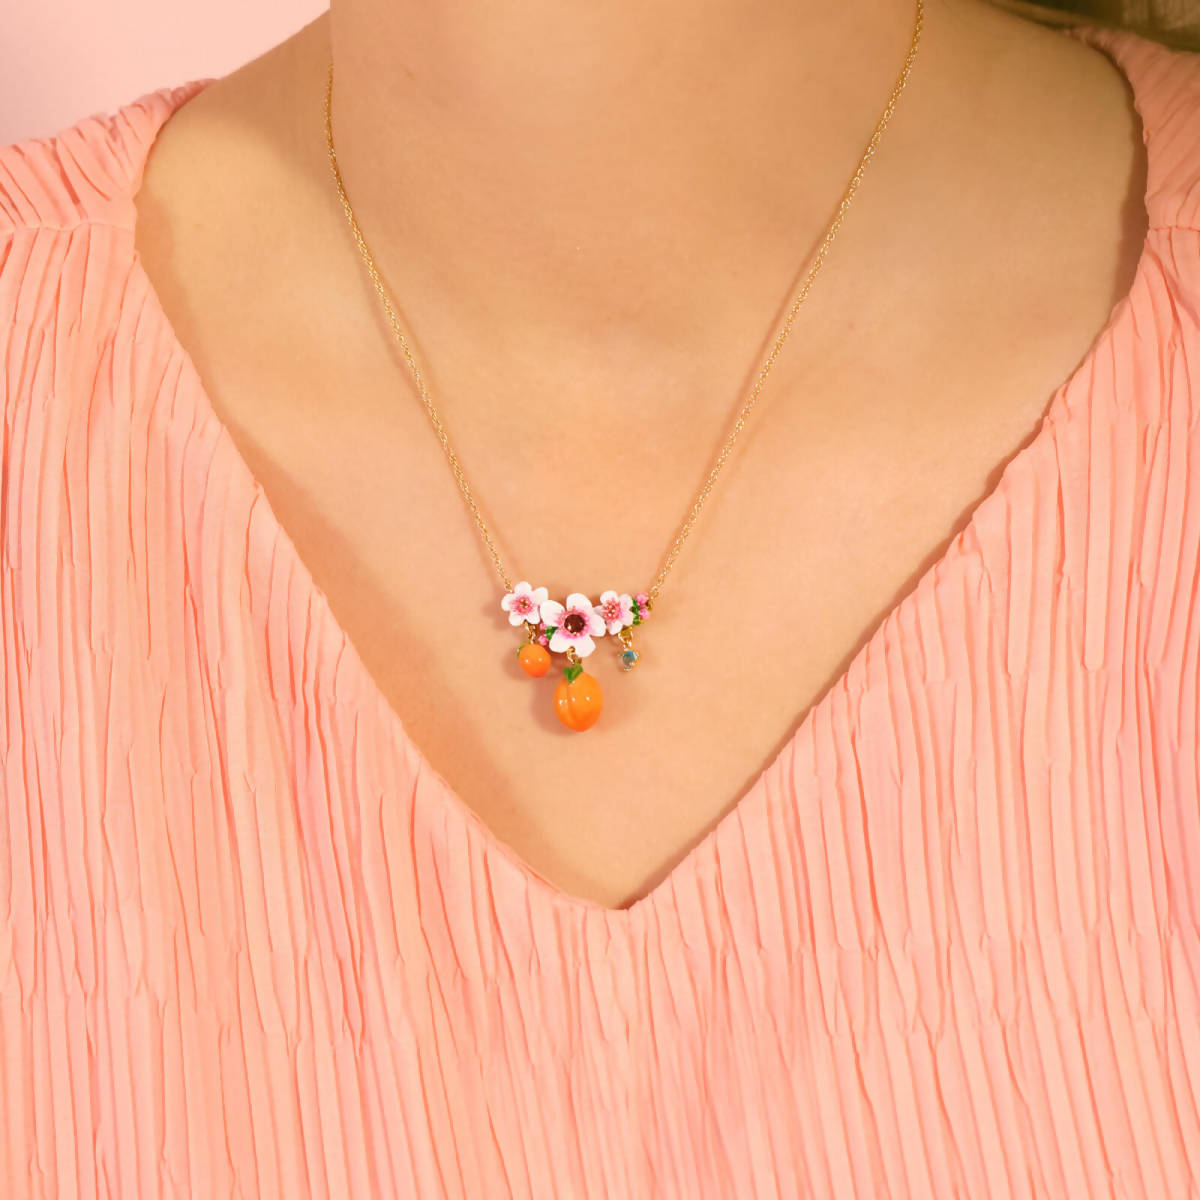 APRICOTS AND FLOWERS STATEMENT NECKLACE - Yooto